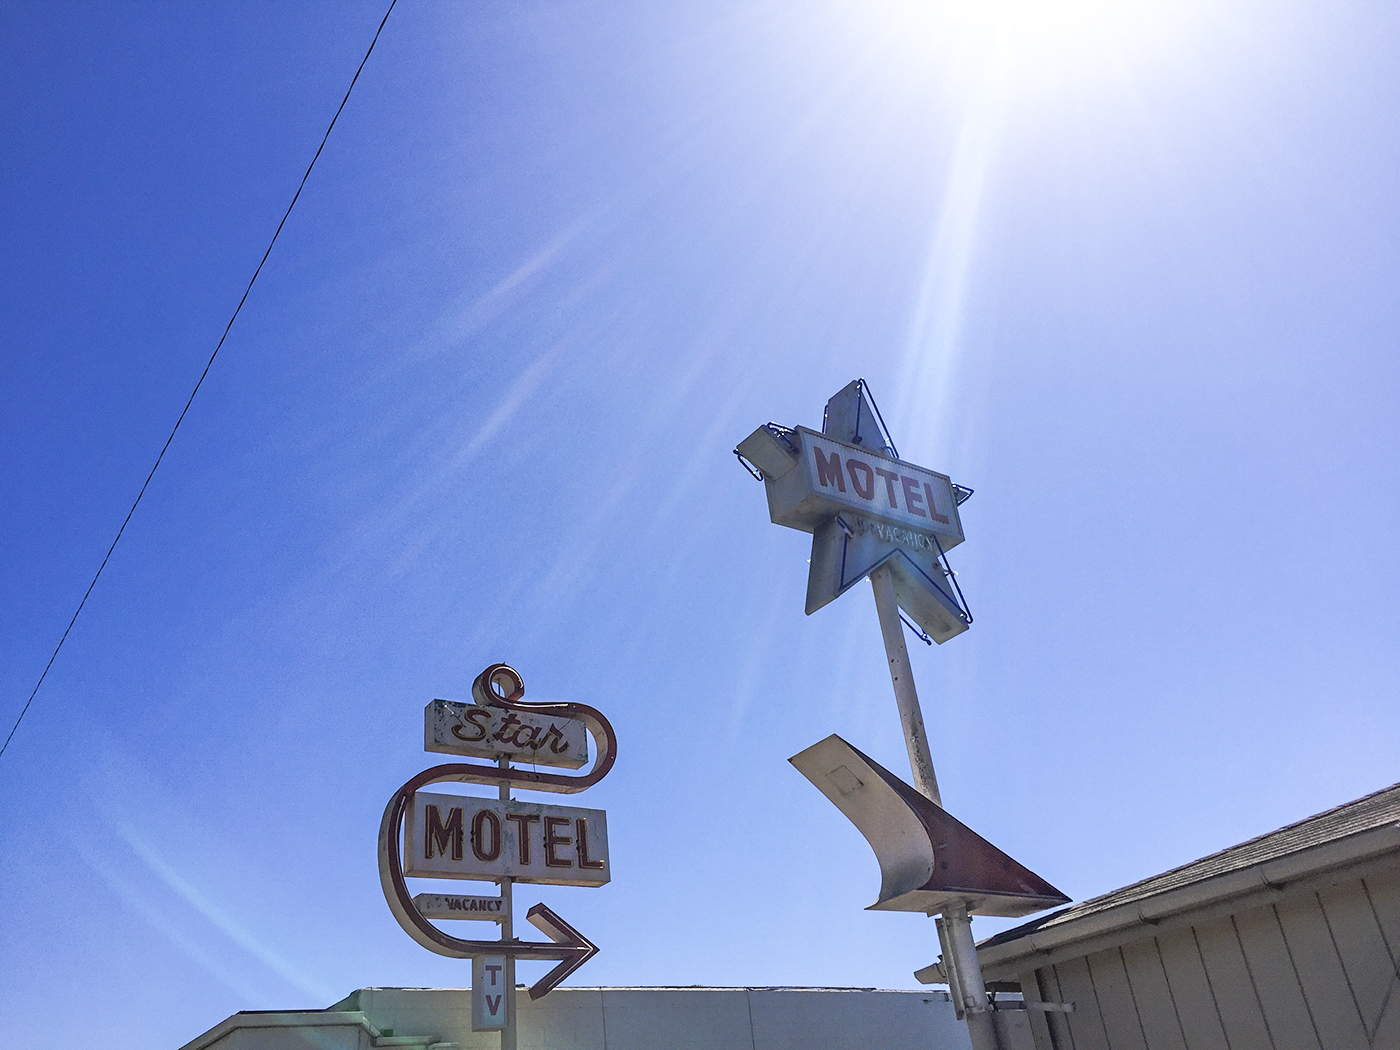 Perhaps this is where the Jetsons stay when in Lompoc. The 'O' on the star sign reflects the funky geometric shapes.